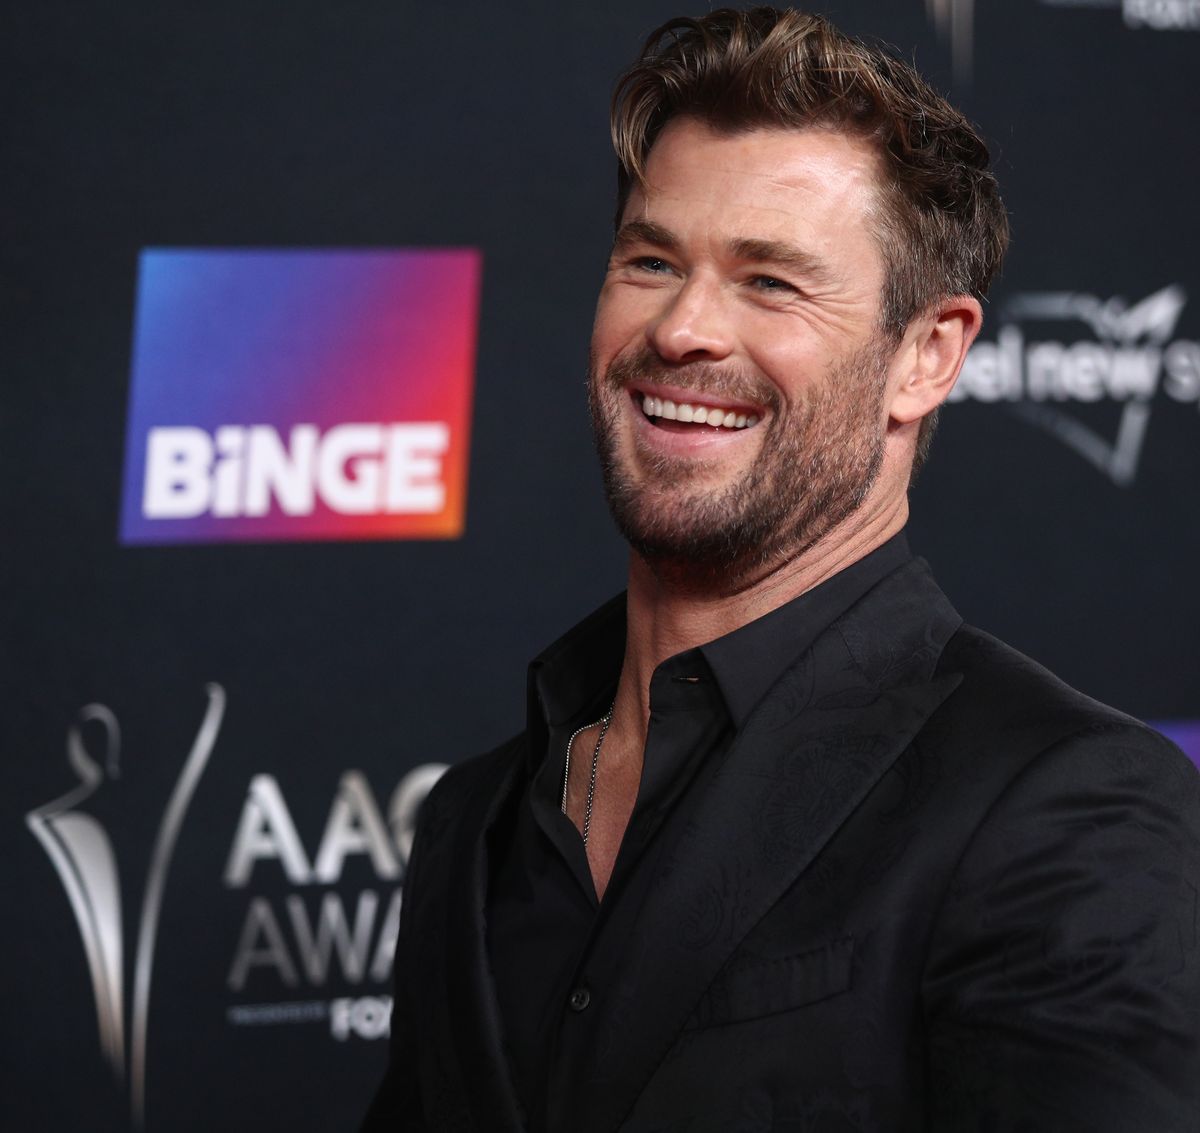 Chris Hemsworth Has Marvel Fatigue Just Like the Rest of Us